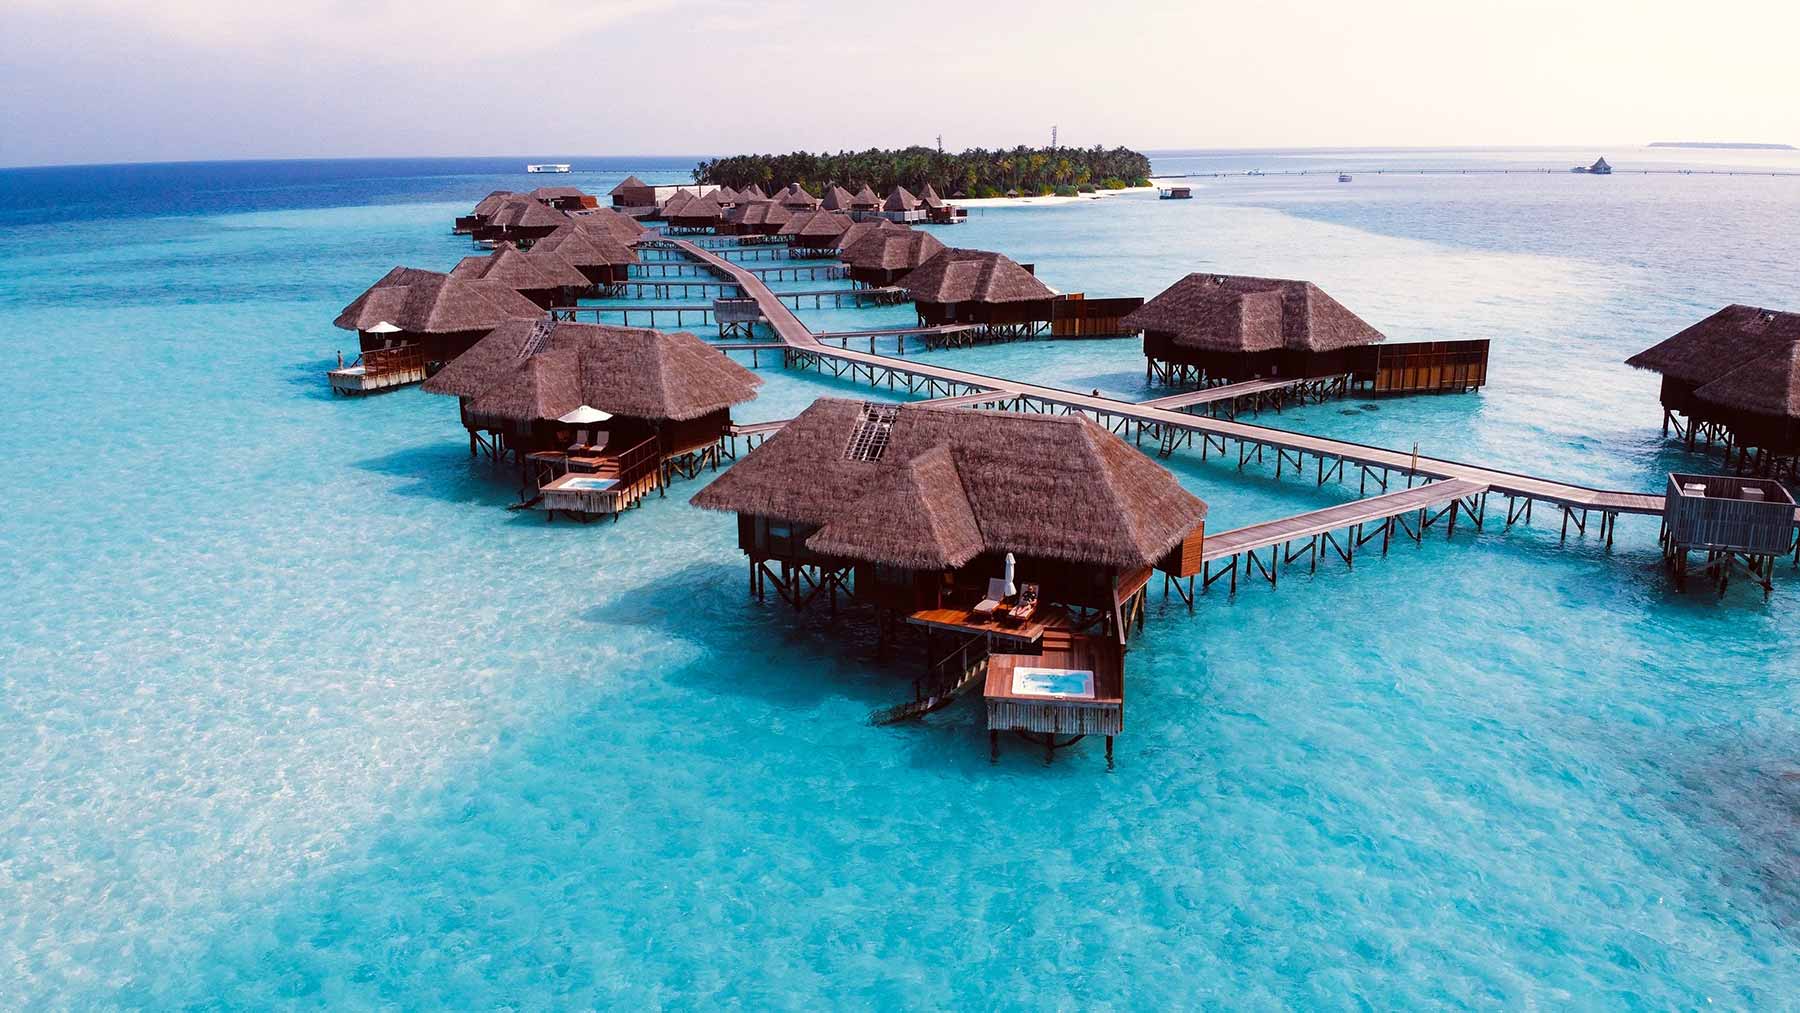 Maldives Honeymoon Guide  Best Hotels, Resorts & Things to Do